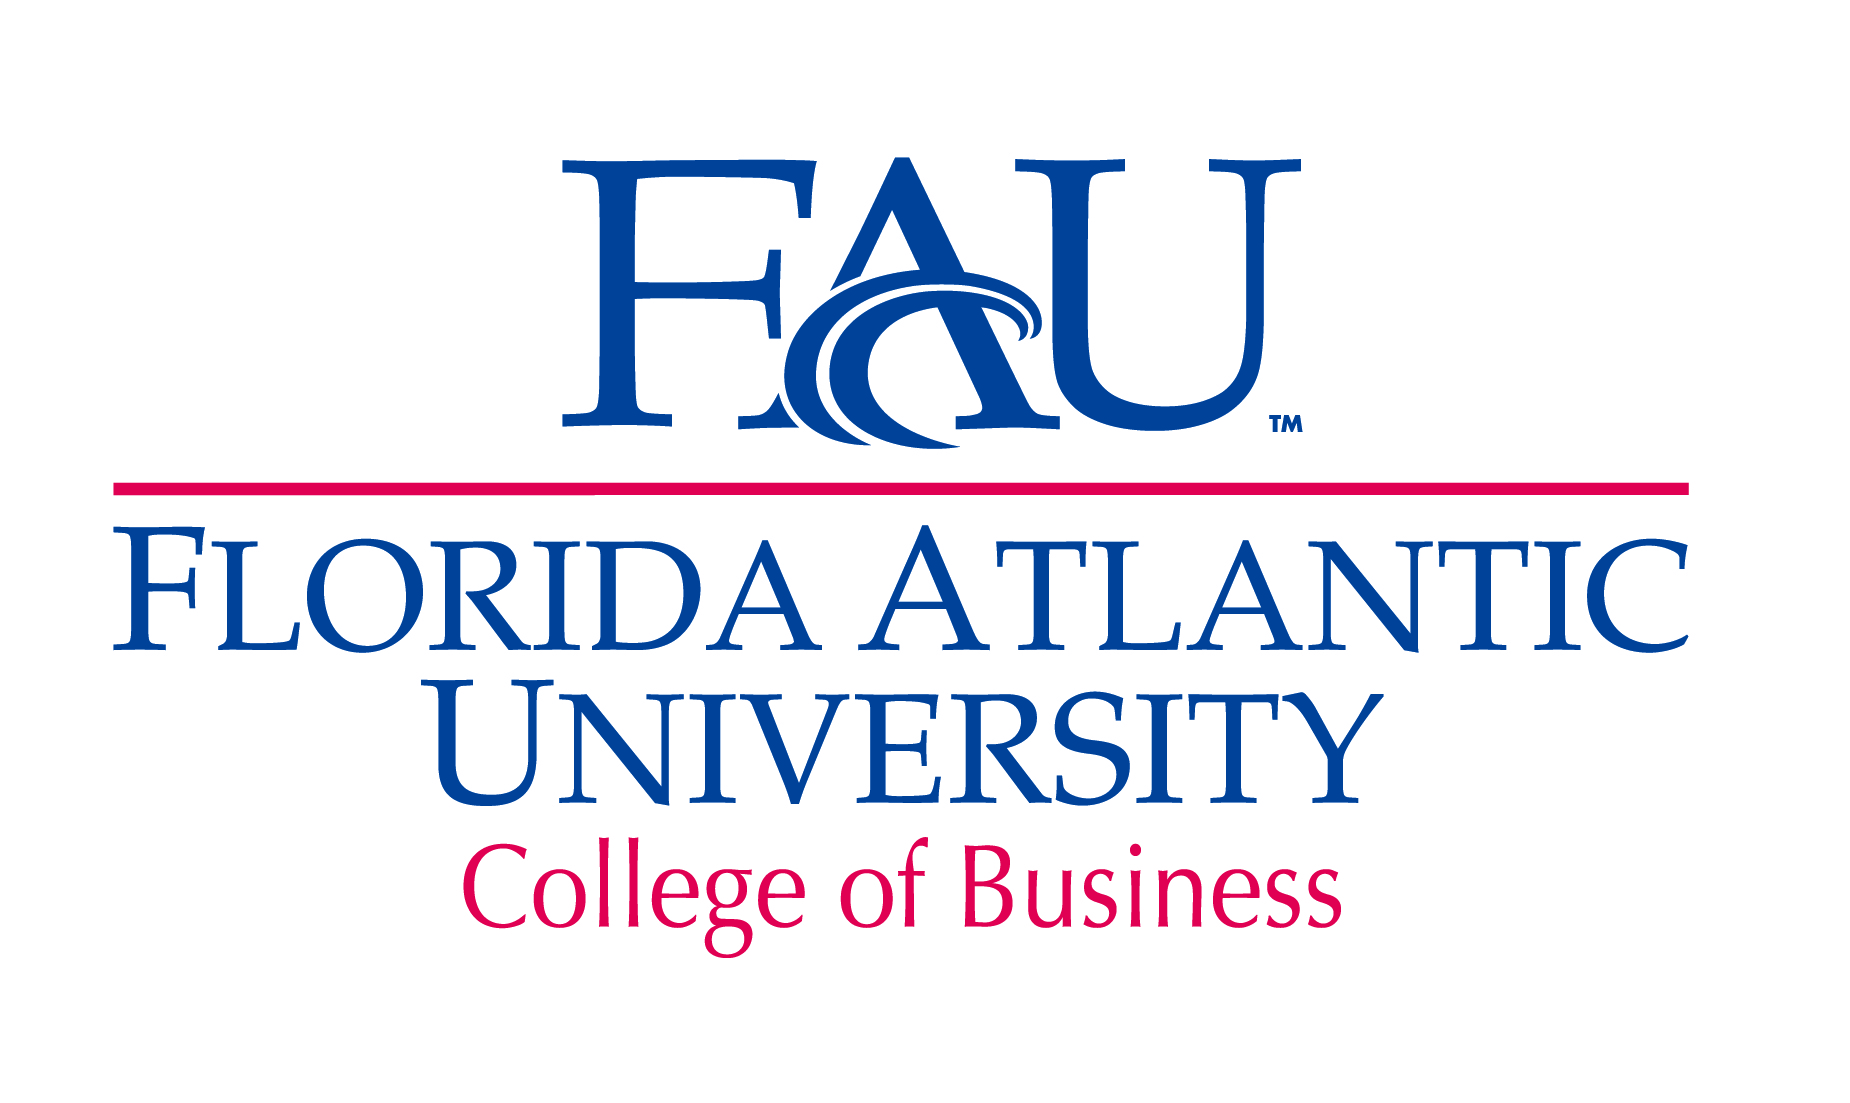 AACSB Extends FAU Co